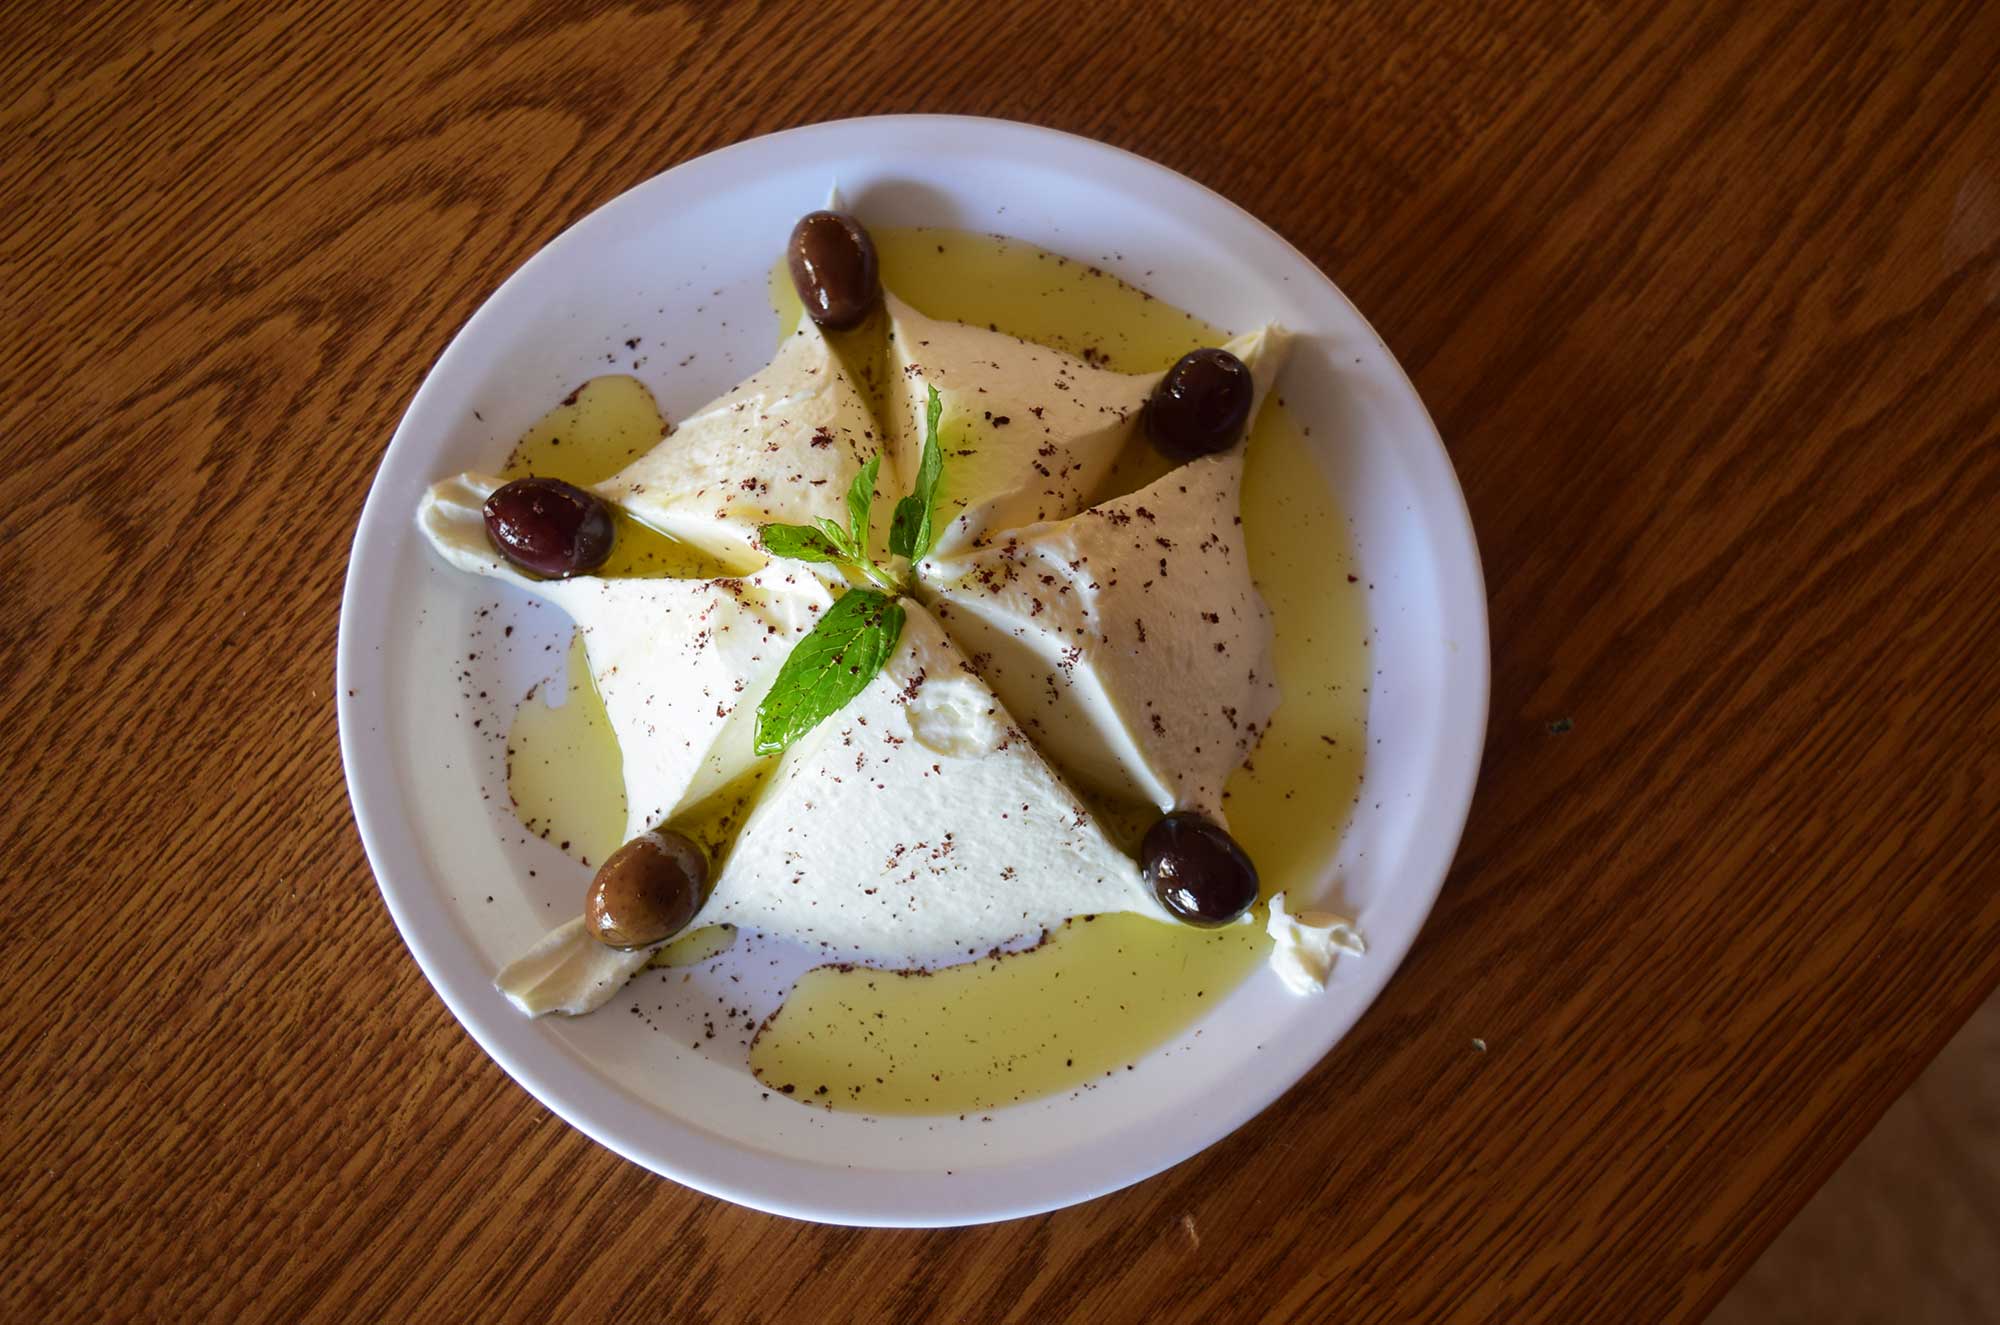 Labneh carefully garnished with olive oil, olives and mint.